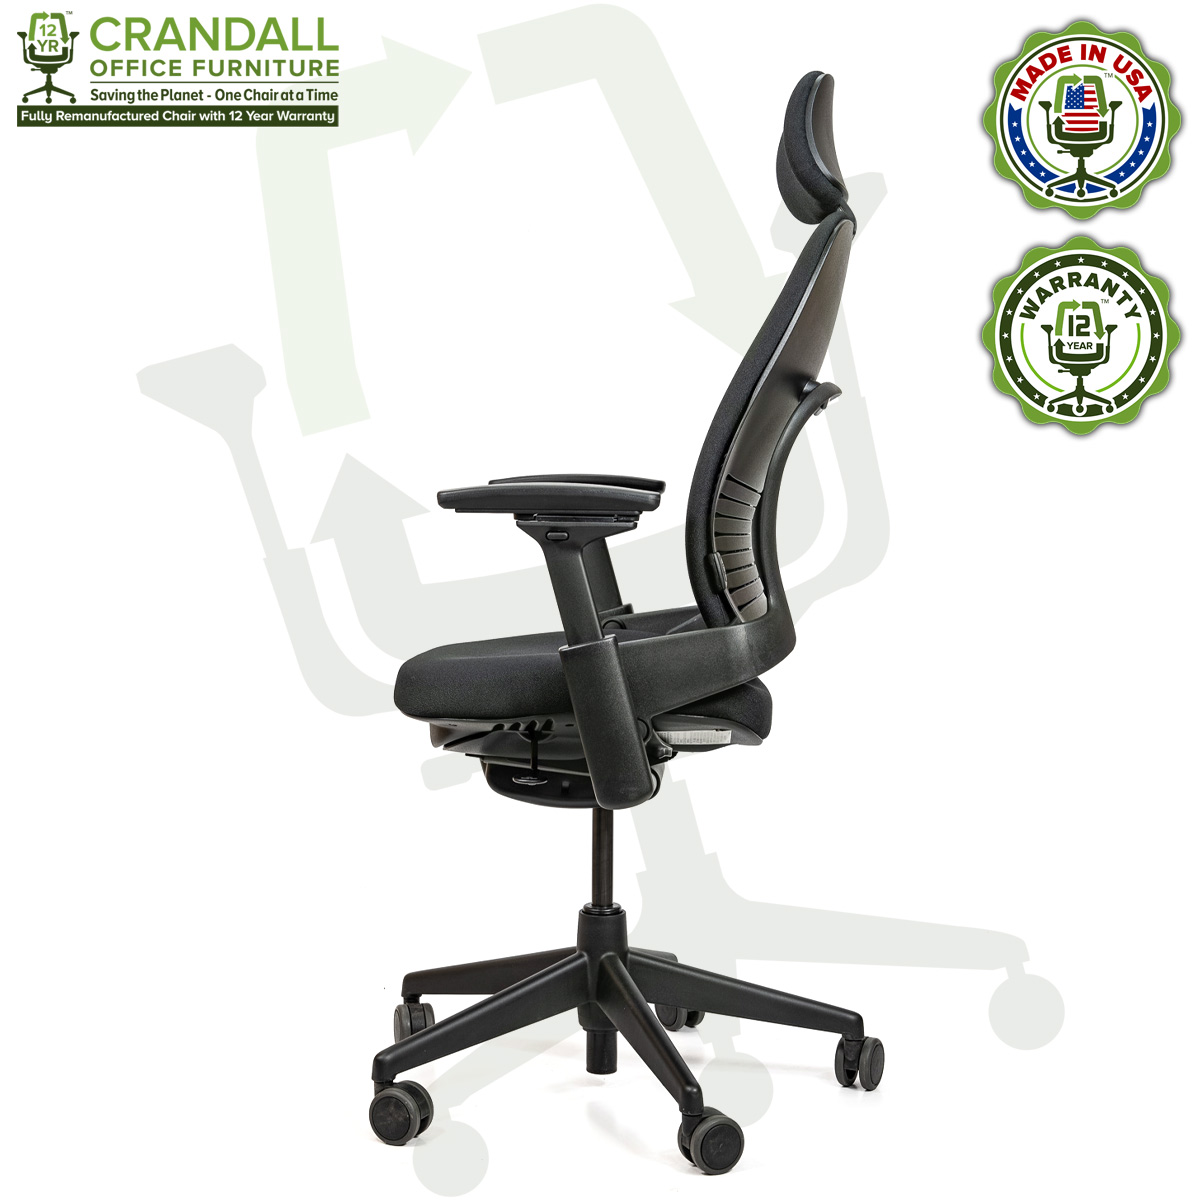 Crandall Office Furniture Remanufactured Steelcase V2 Leap Chair with Headrest 03